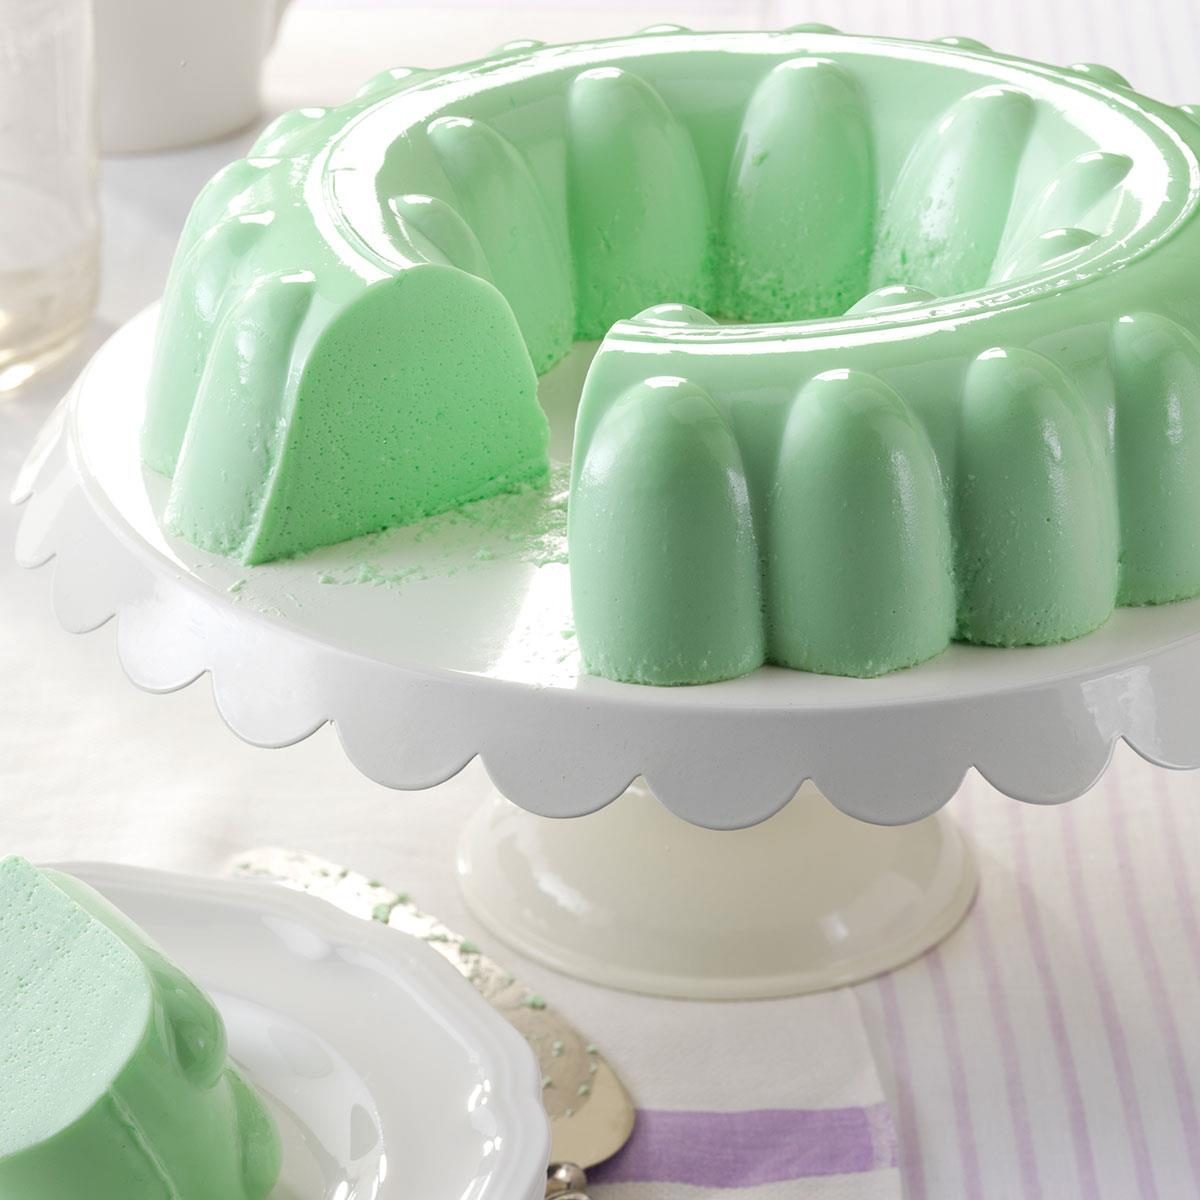 Why It's Time To Bring Back the Jello Mold